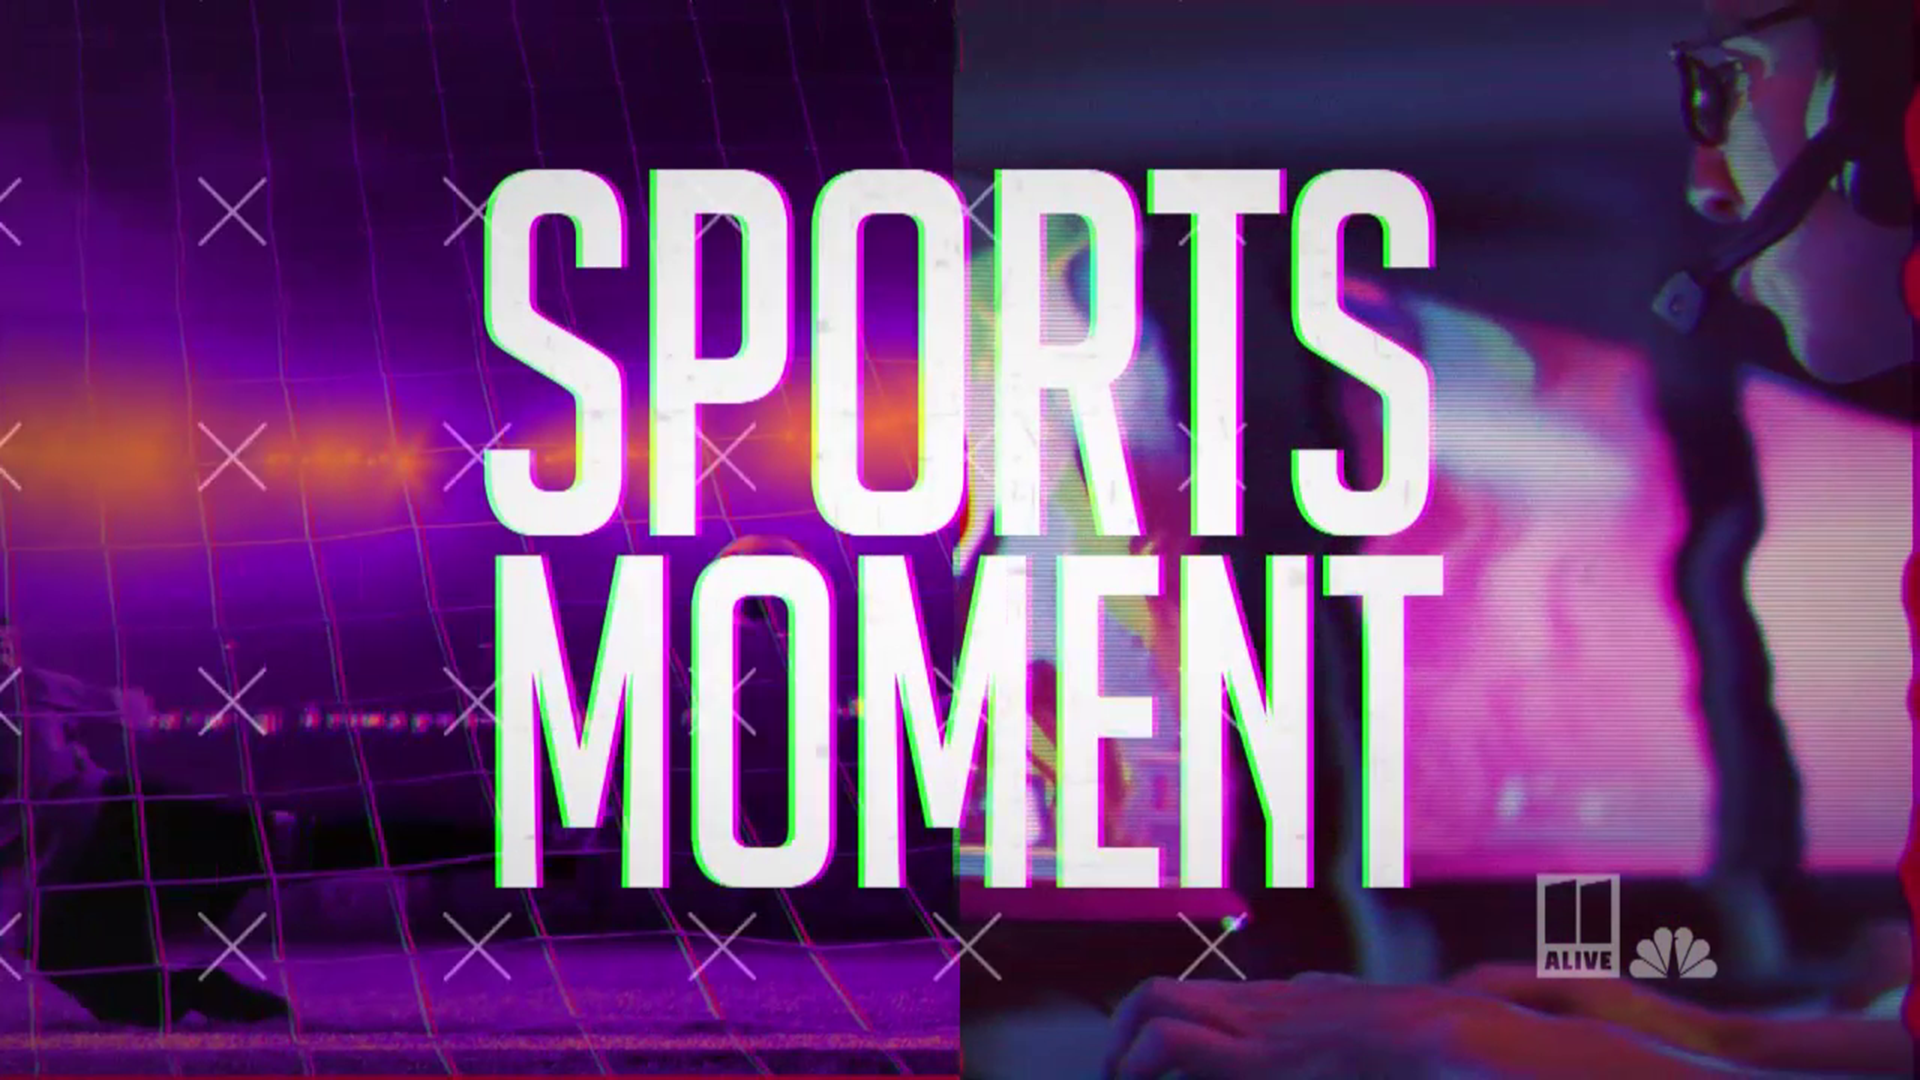 These are the nominees for the Top Sports Moment presented by Mercedes-Benz.